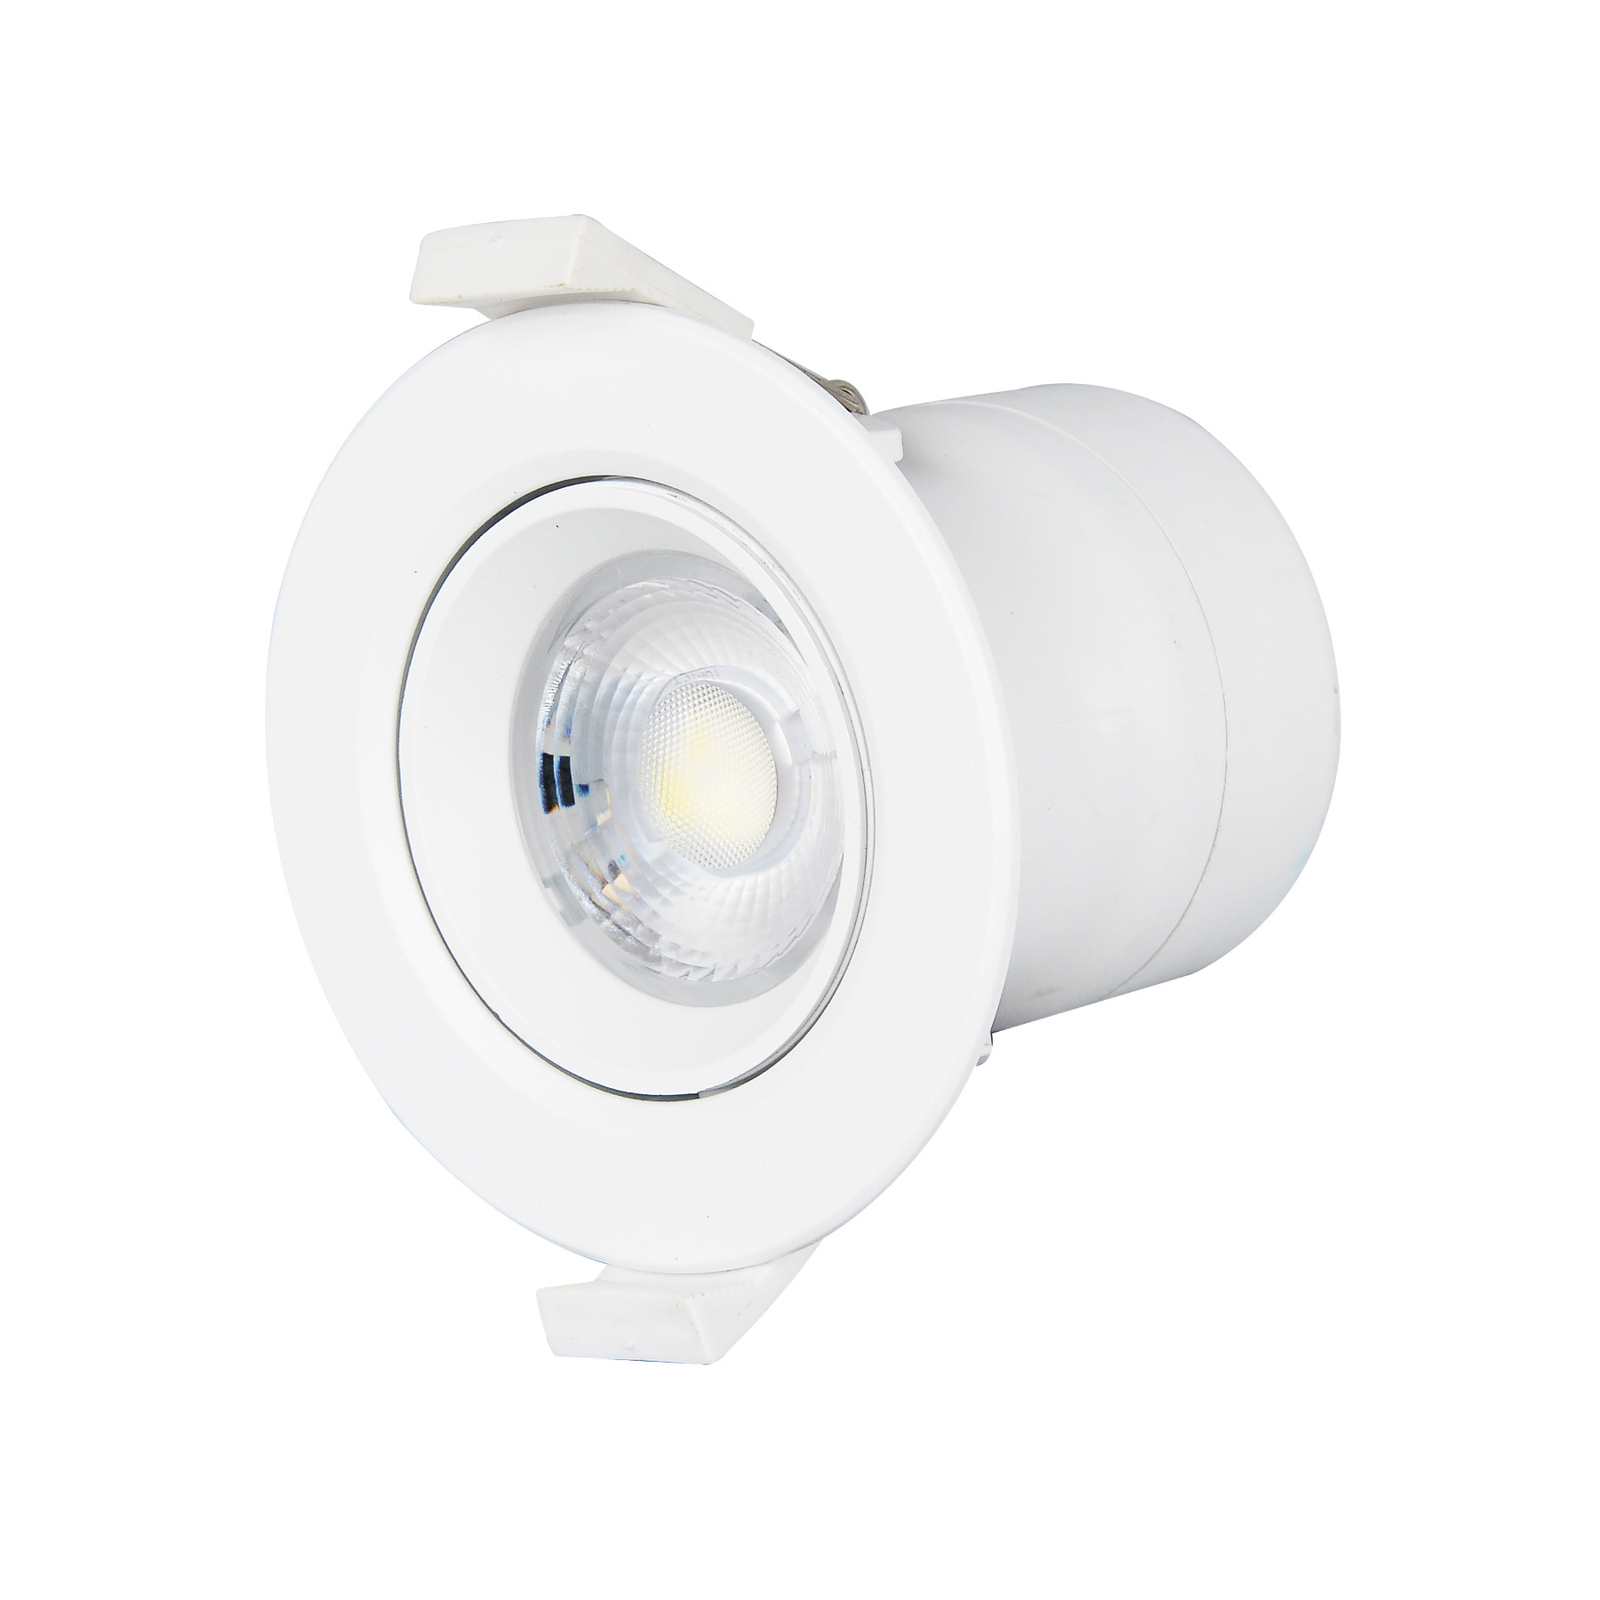 Prios LED recessed light Shima, white, 7W, 3000K, 10pcs, dimmable